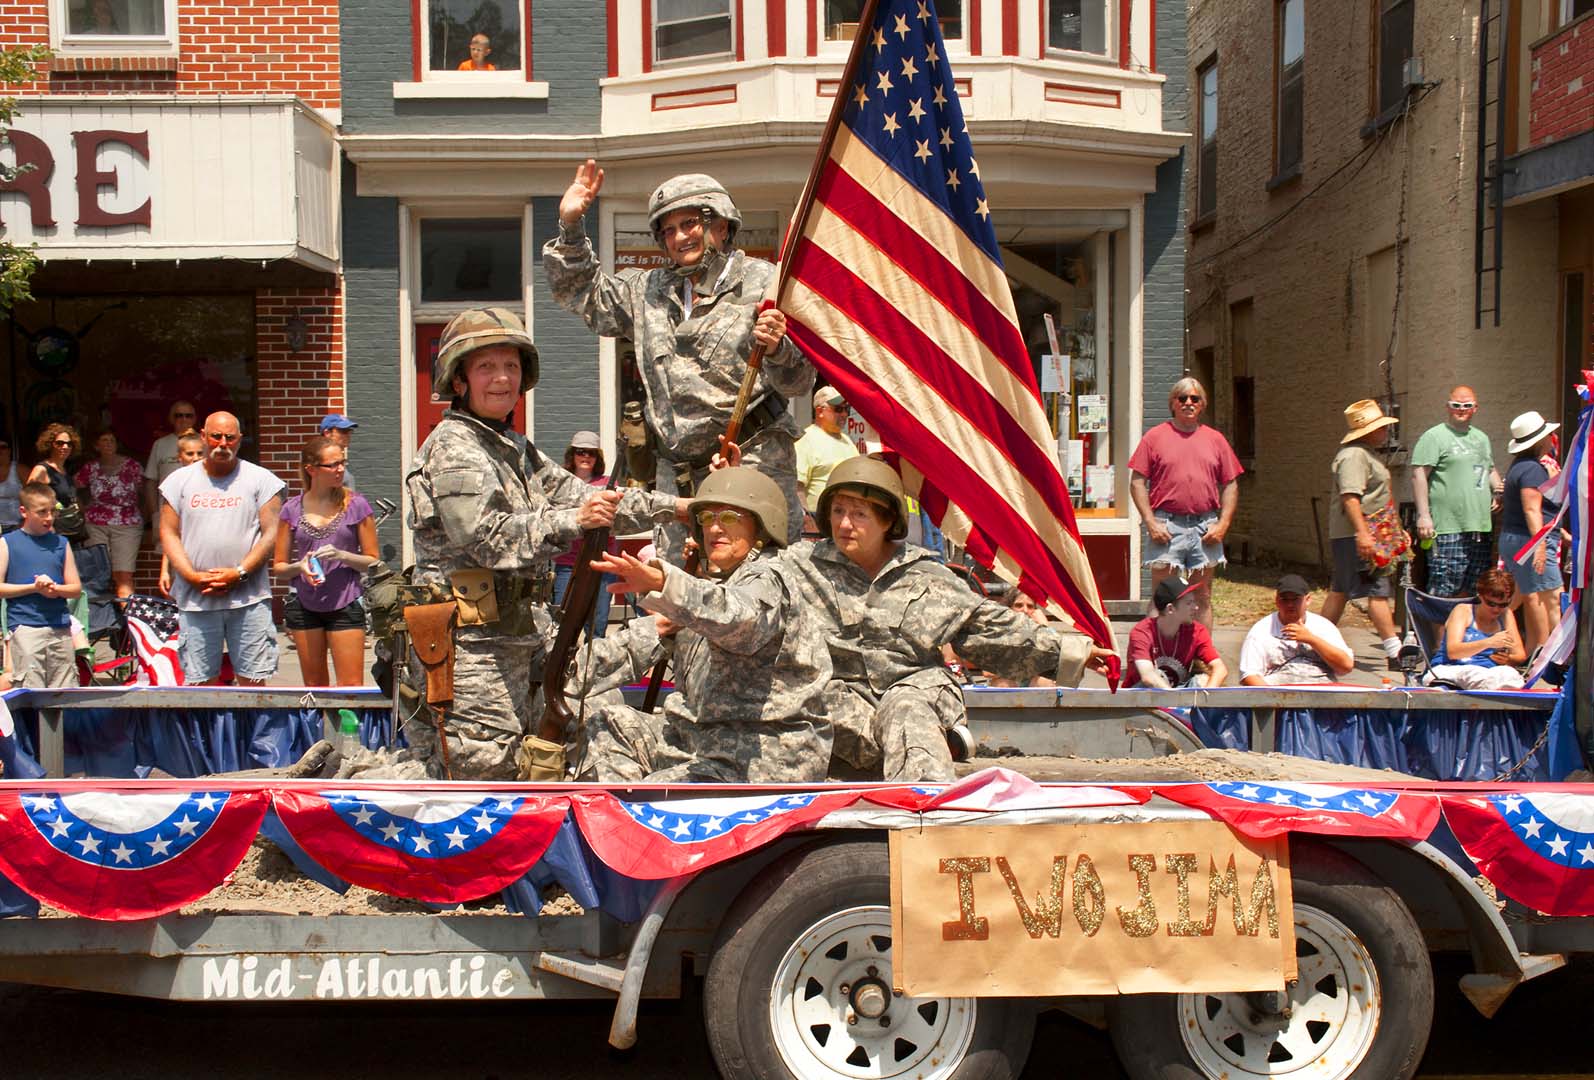 New York Saugerties Small Town Parade The Eye of Photography Magazine